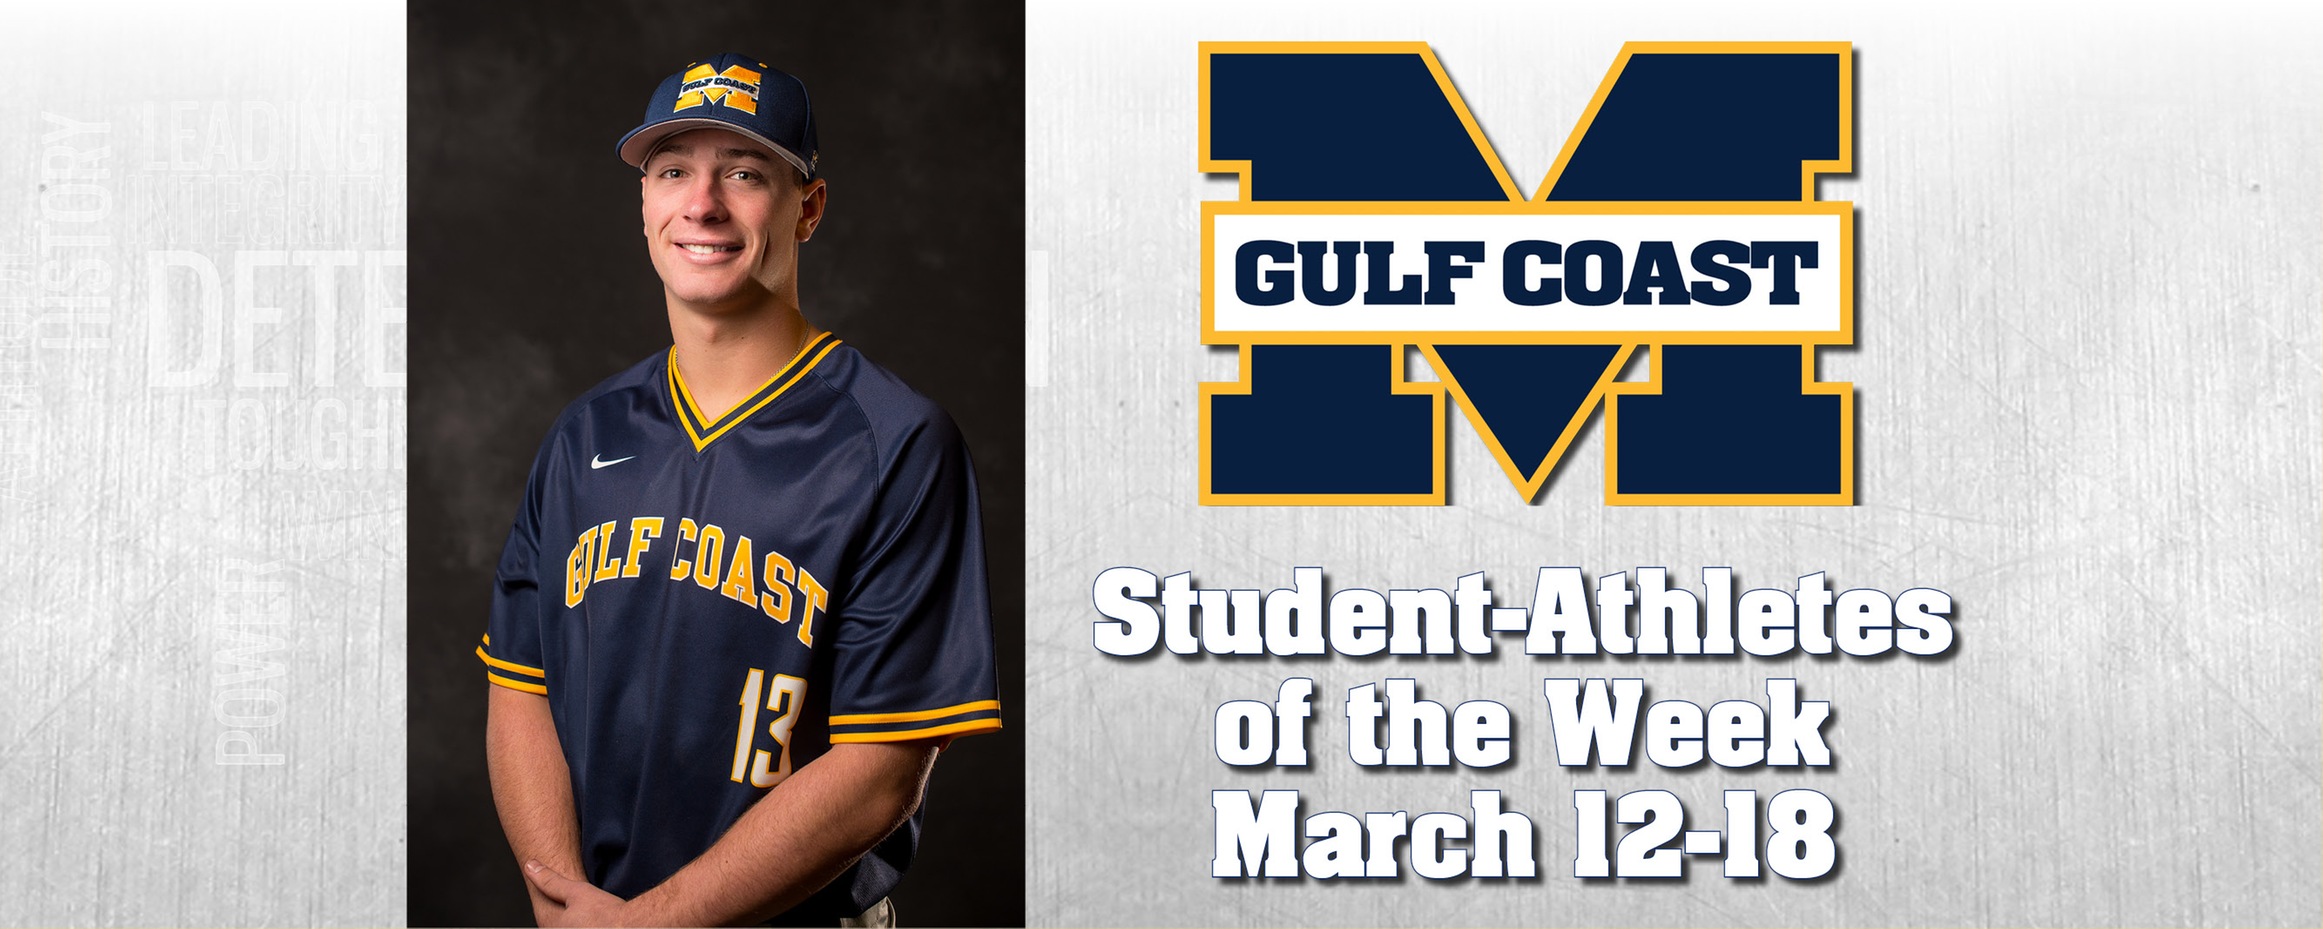 O’Shea named MGCCC Student-Athlete of the Week